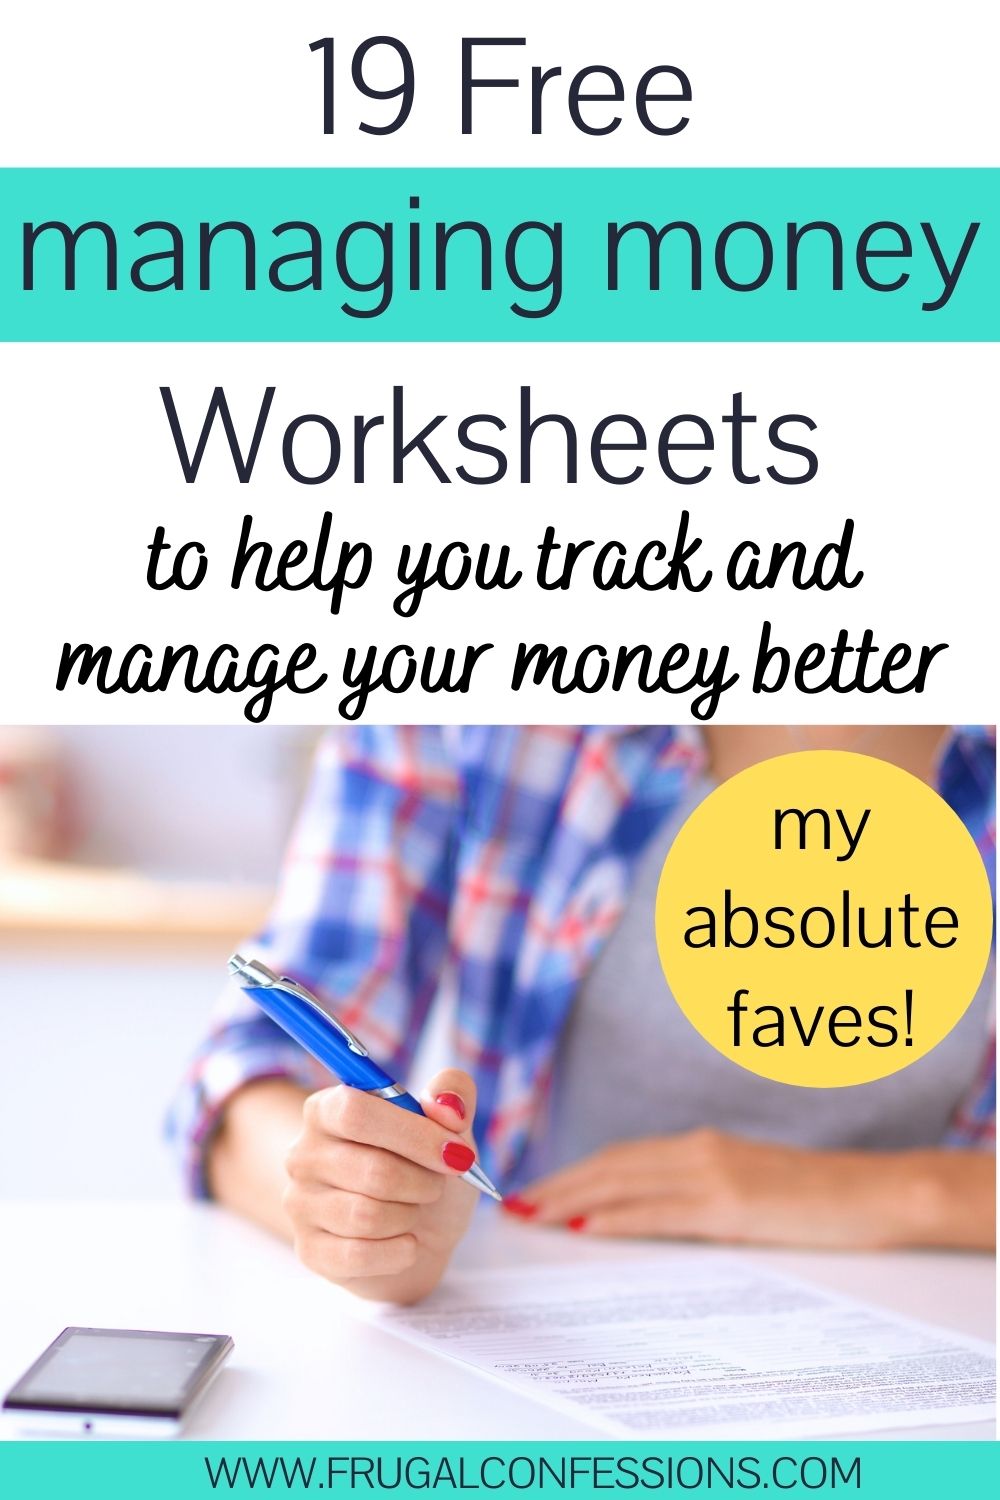 woman in blue plaid shirt working on how to manage your money worksheets, text overlay "19 free managing money worksheets"